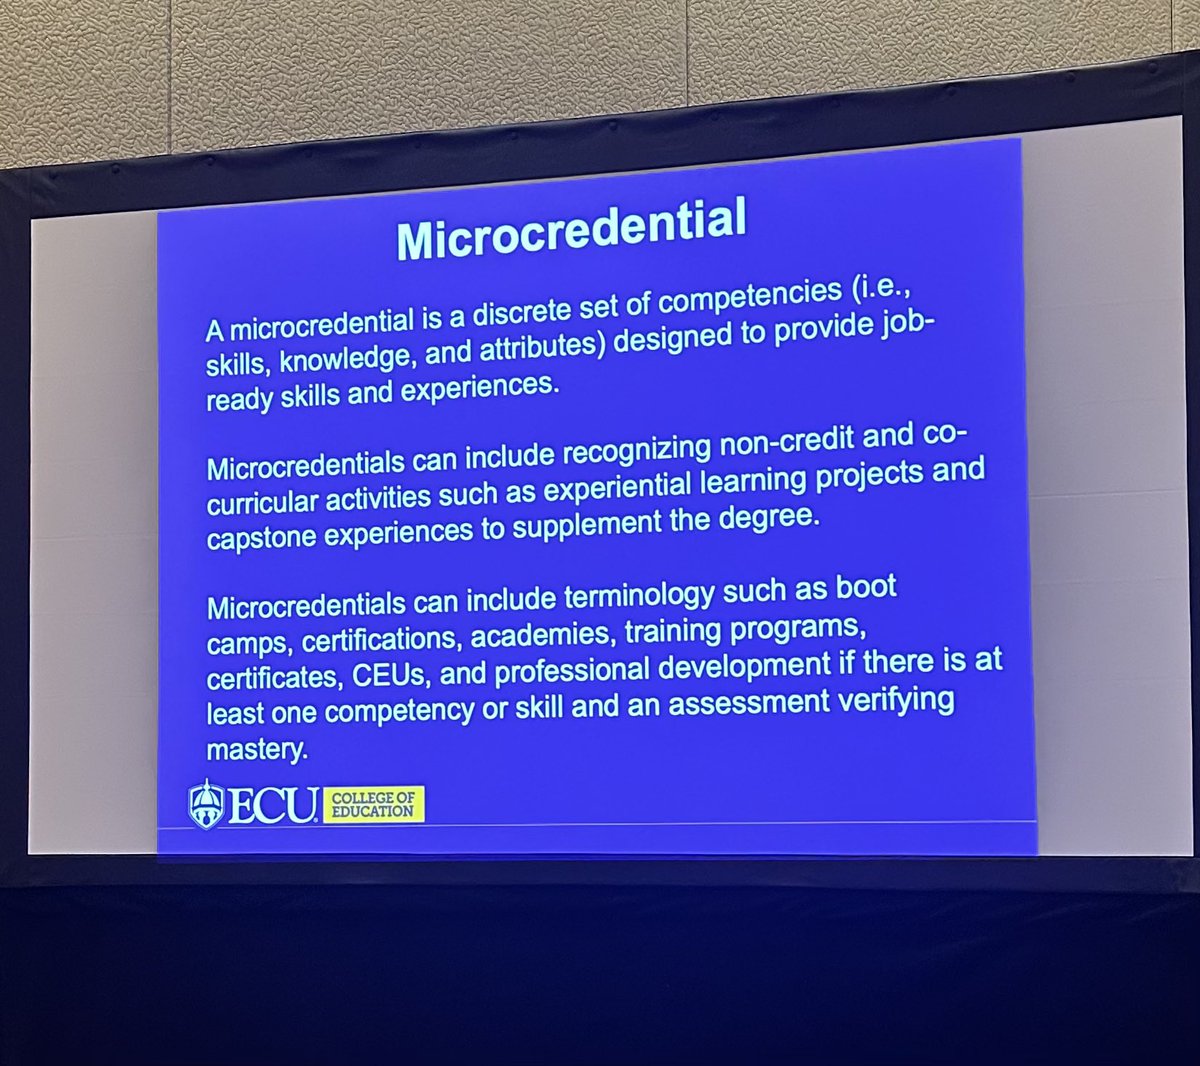 Learning more about the development of microcredentials this afternoon! #learnfwd23 @mrslamon